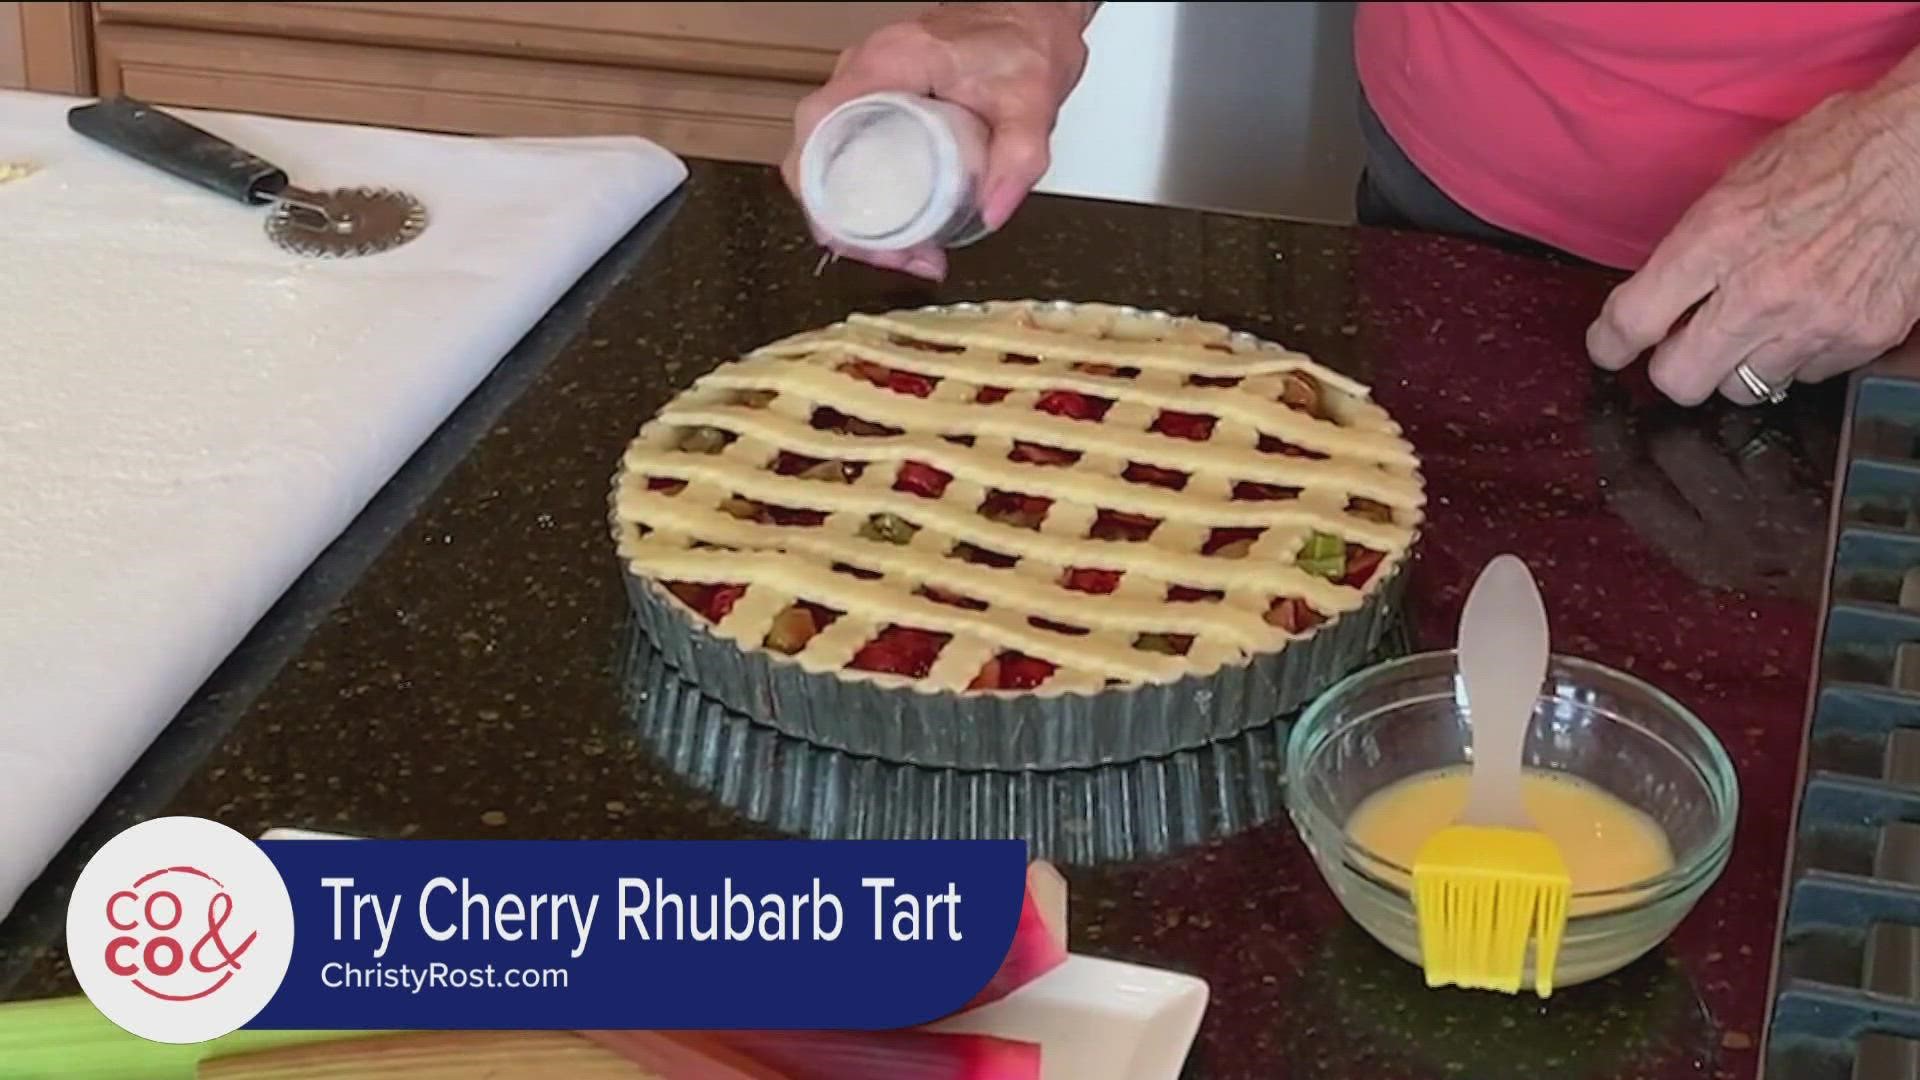 Straight from her Breckenridge kitchen, chef Christy Rost shares her rhubarb and cherry tart. It's a sweet and tangy dessert!